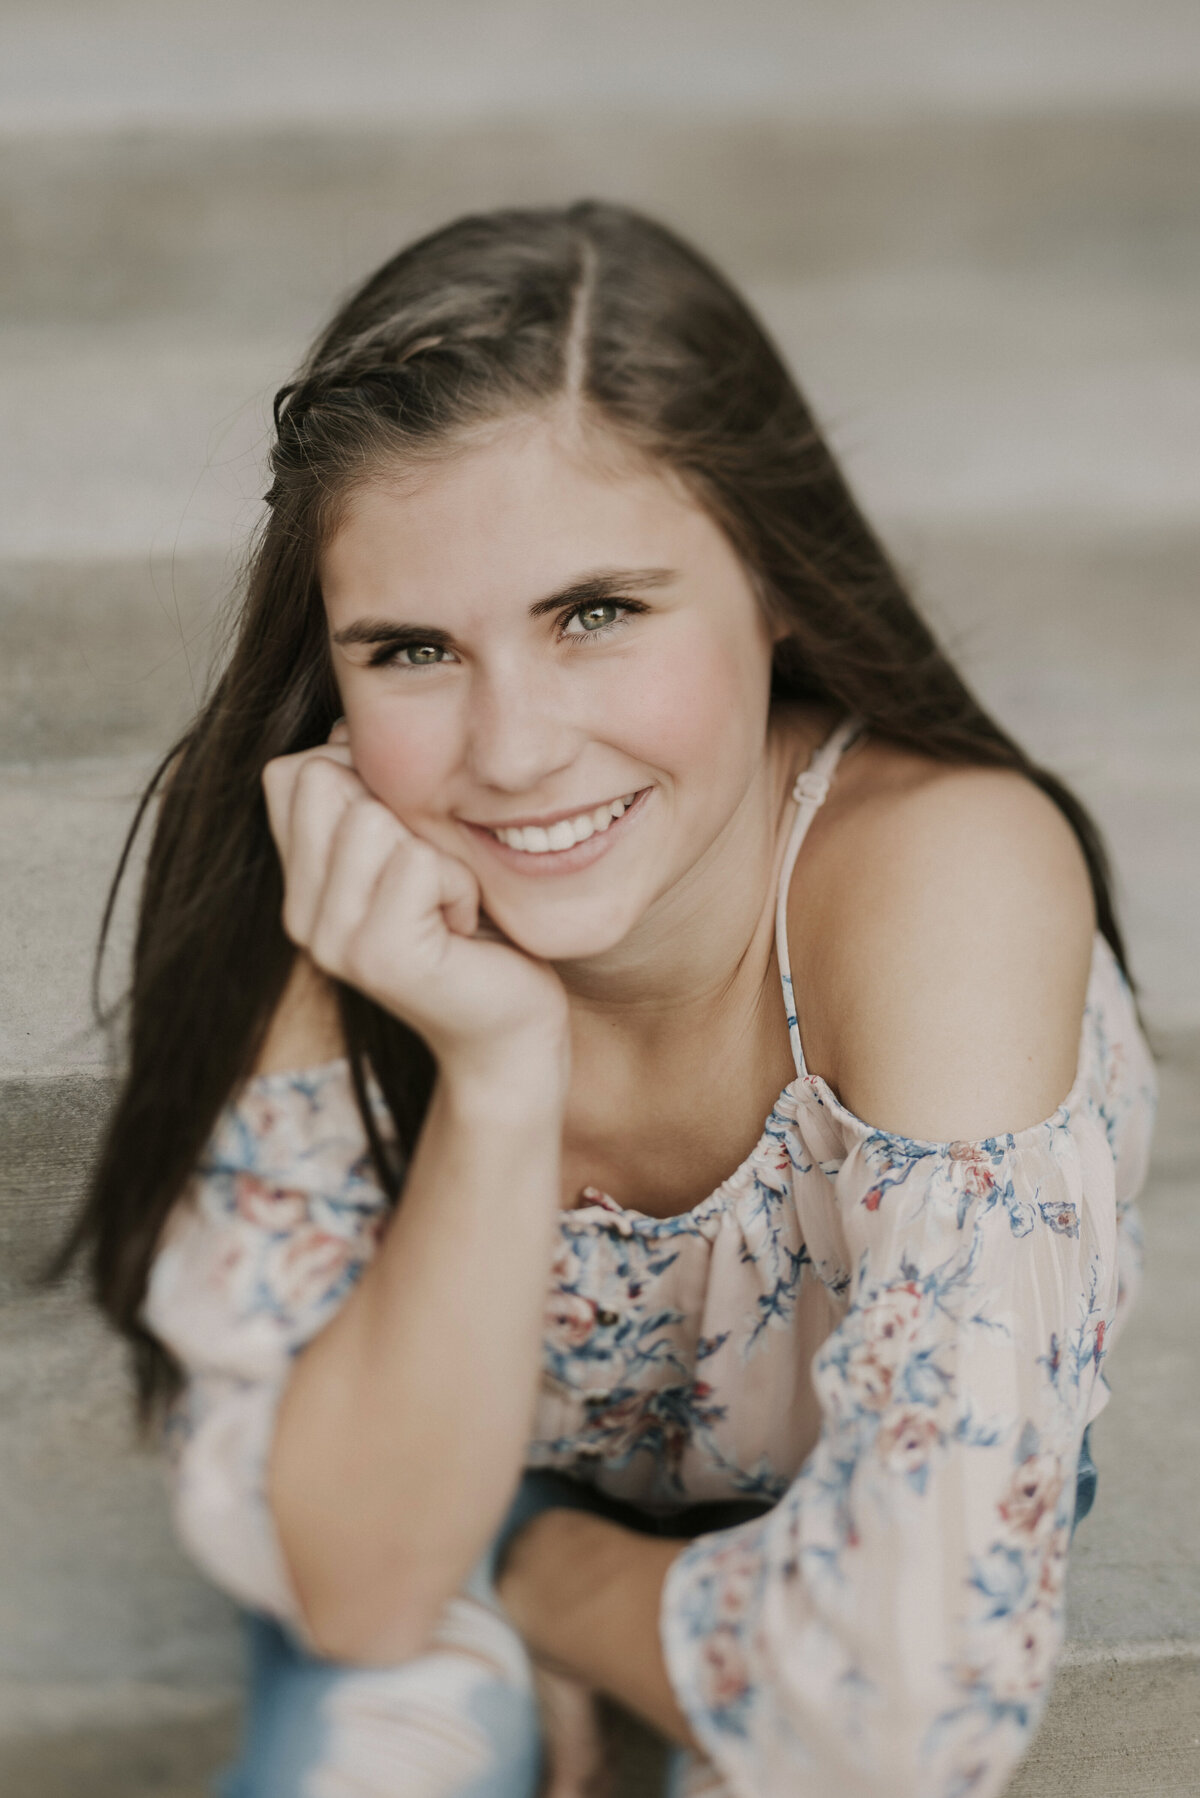 Capture the serenity of senior moments on St. Paul's concrete steps. Shannon Kathleen Photography brings urban landscapes into focus. Book your serene city session